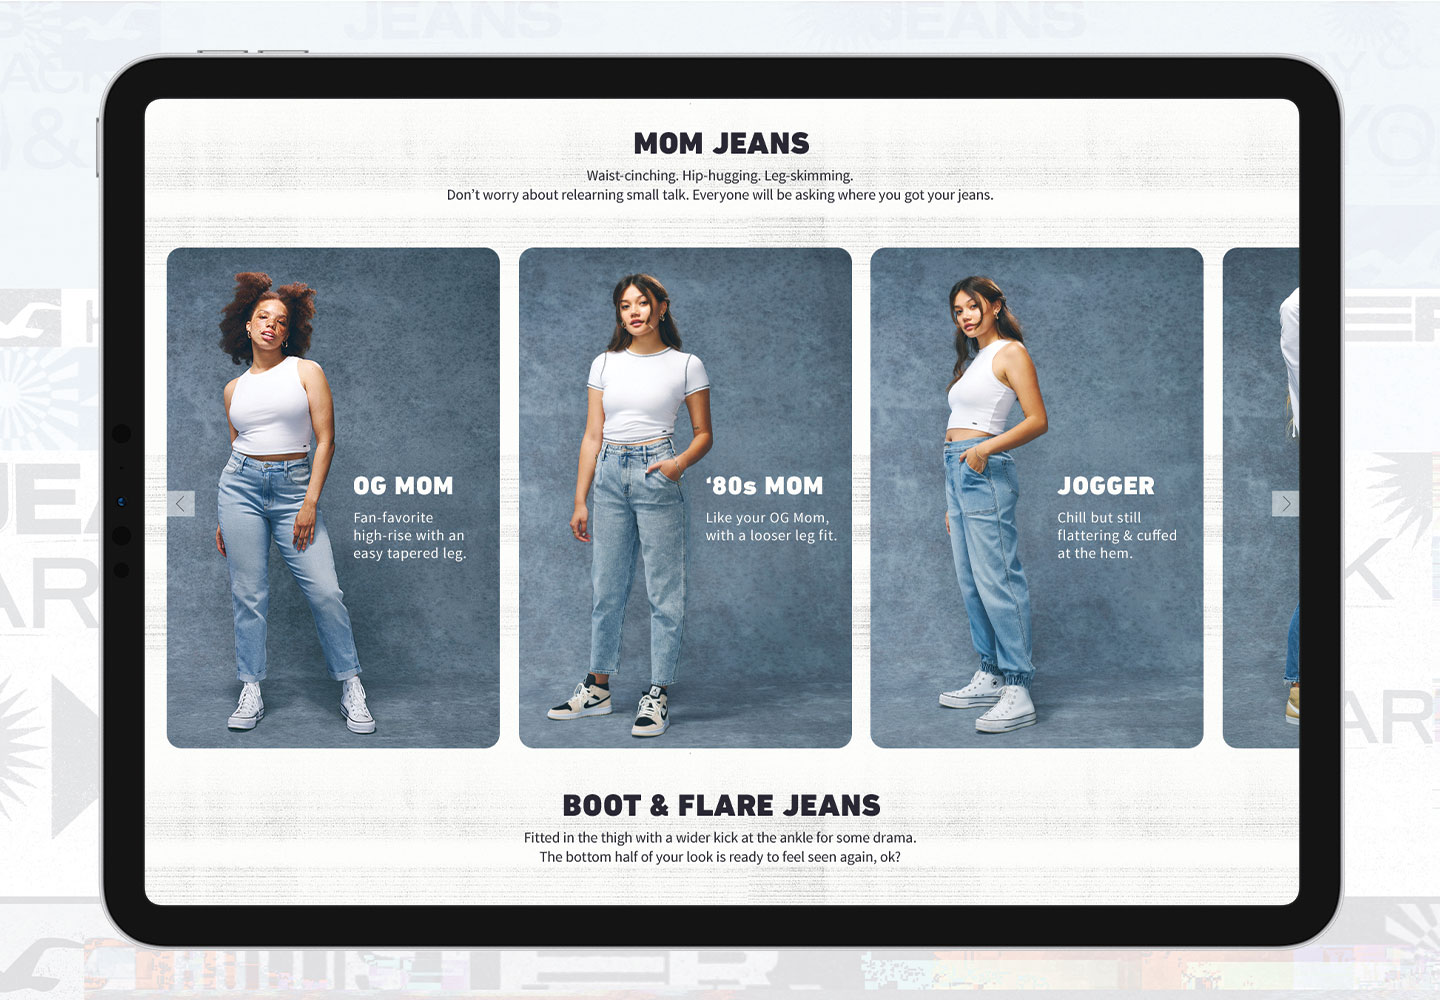 Hollister Jeans Are Back, Baby